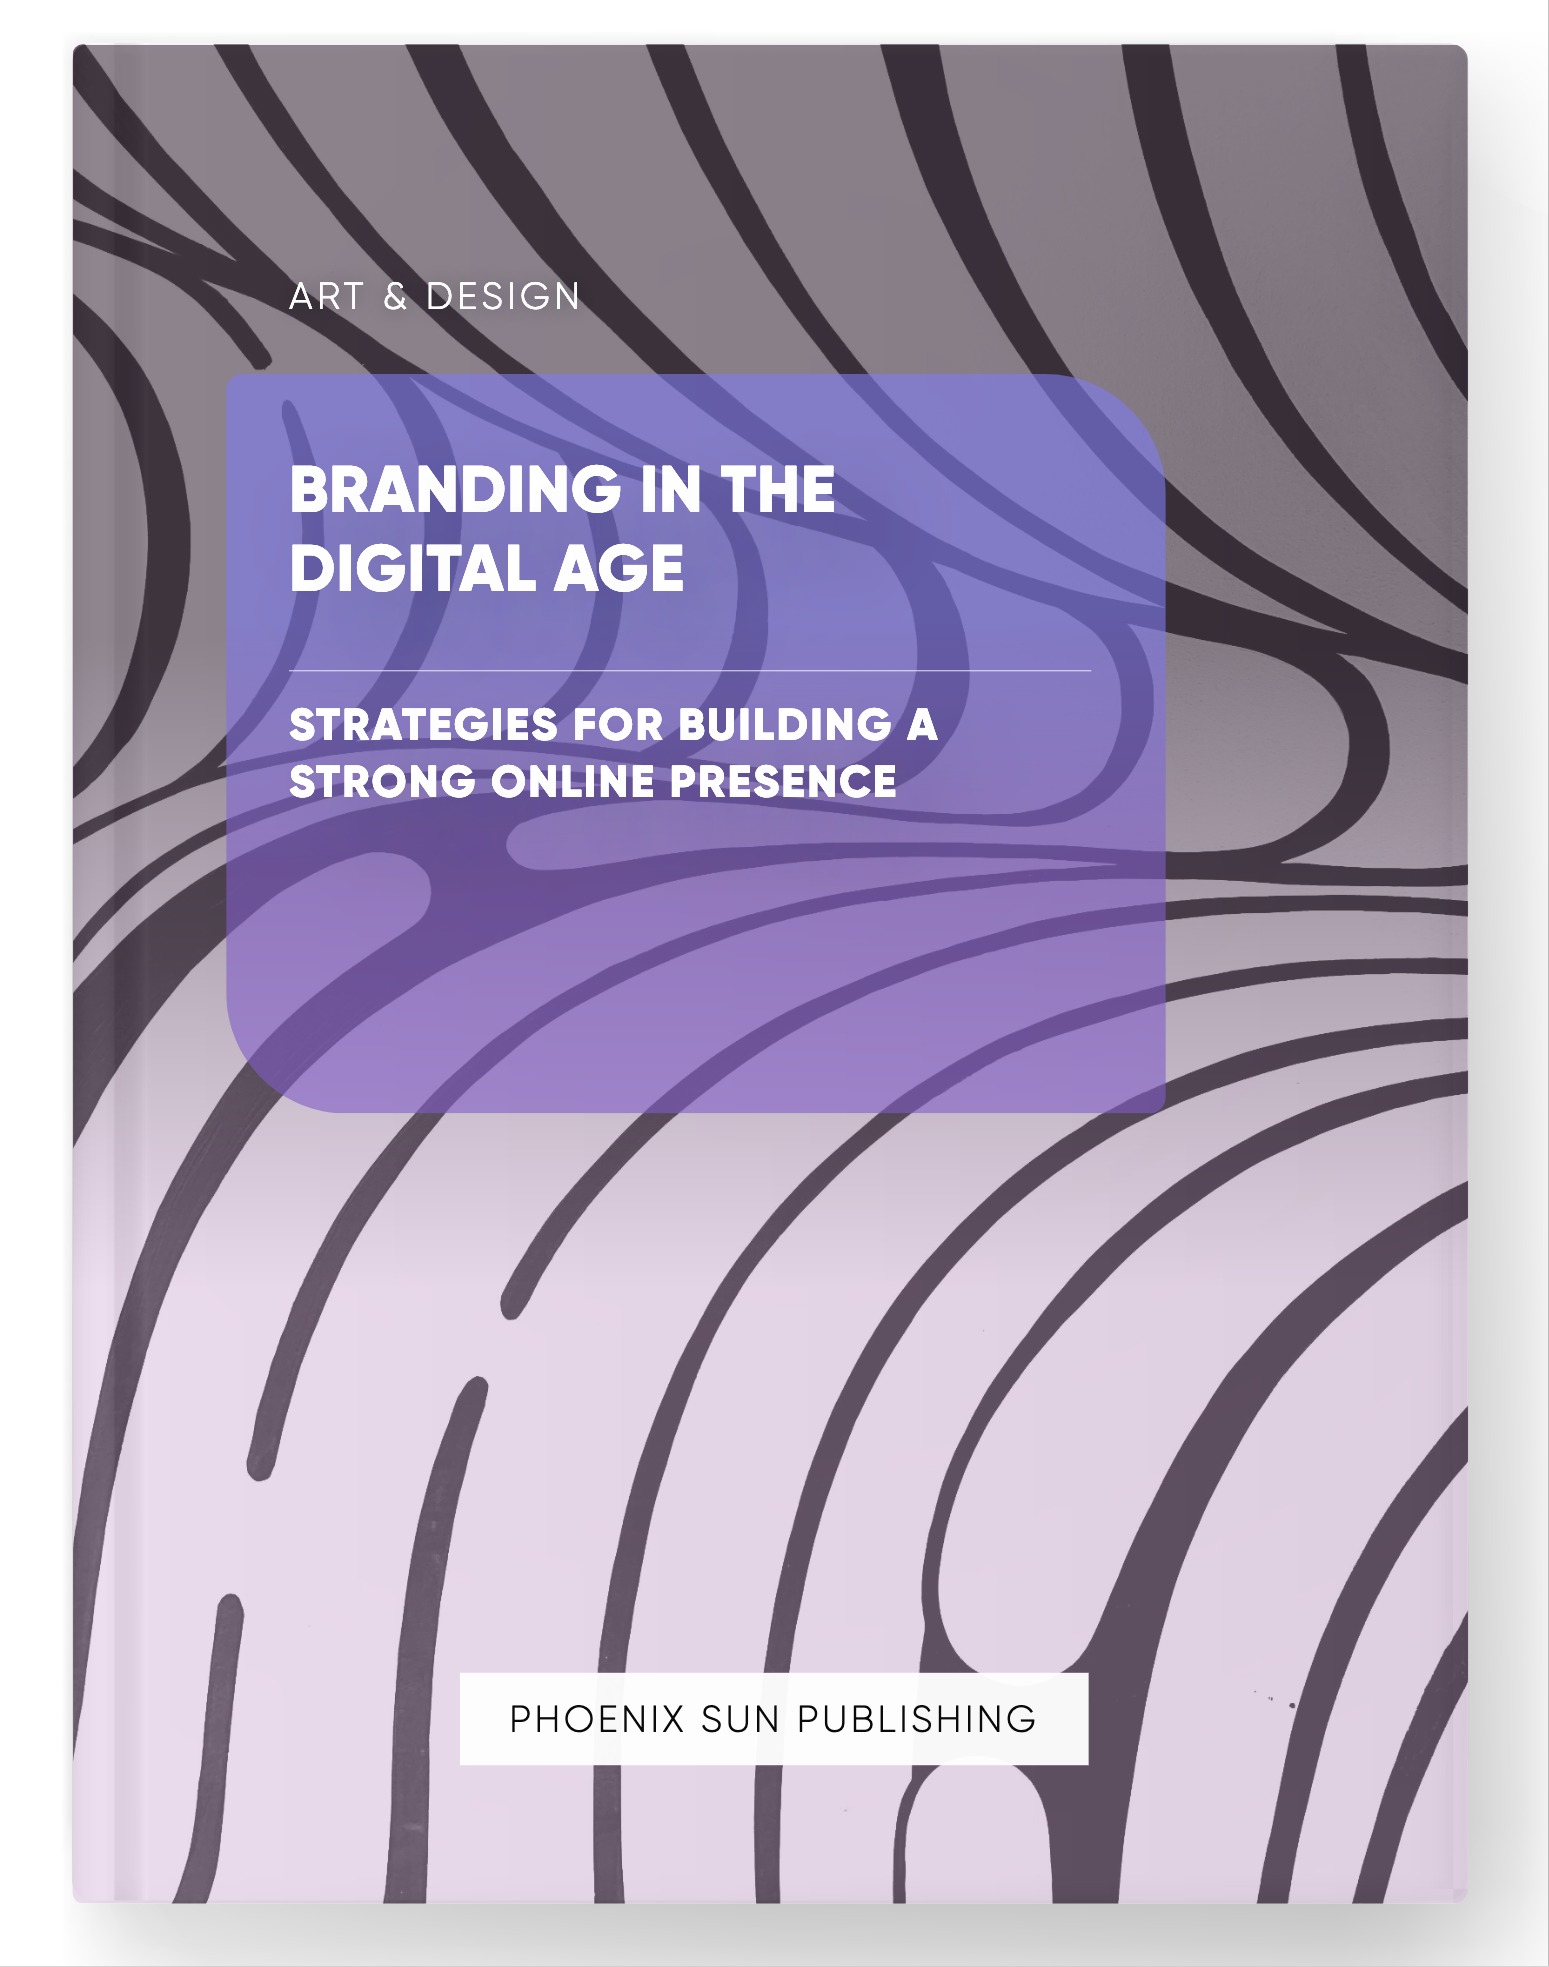 Branding in the Digital Age – Strategies for Building a Strong Online Presence